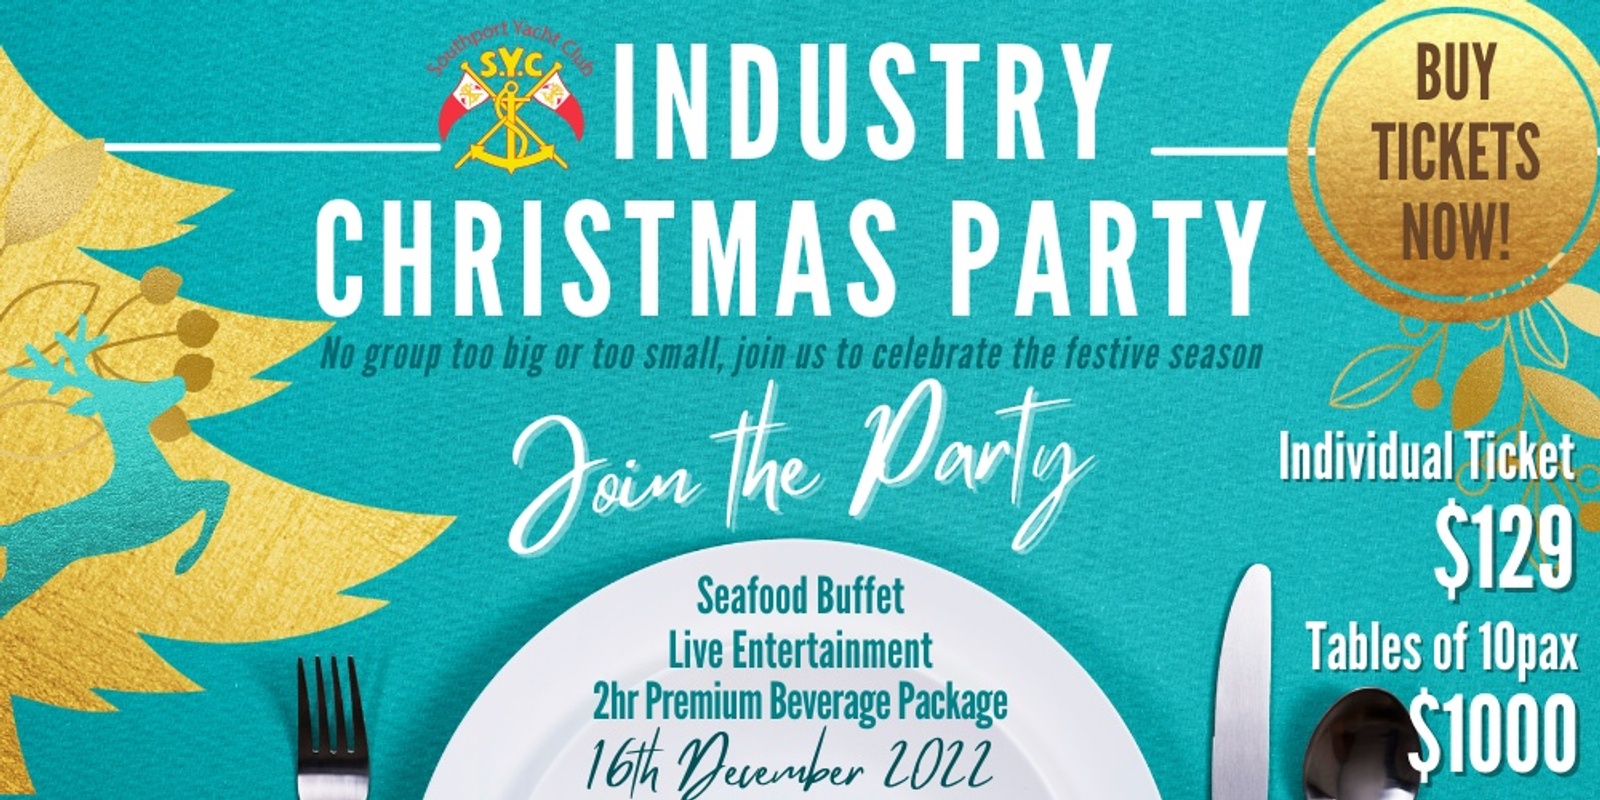 Banner image for SYC Industry Christmas Party 2022